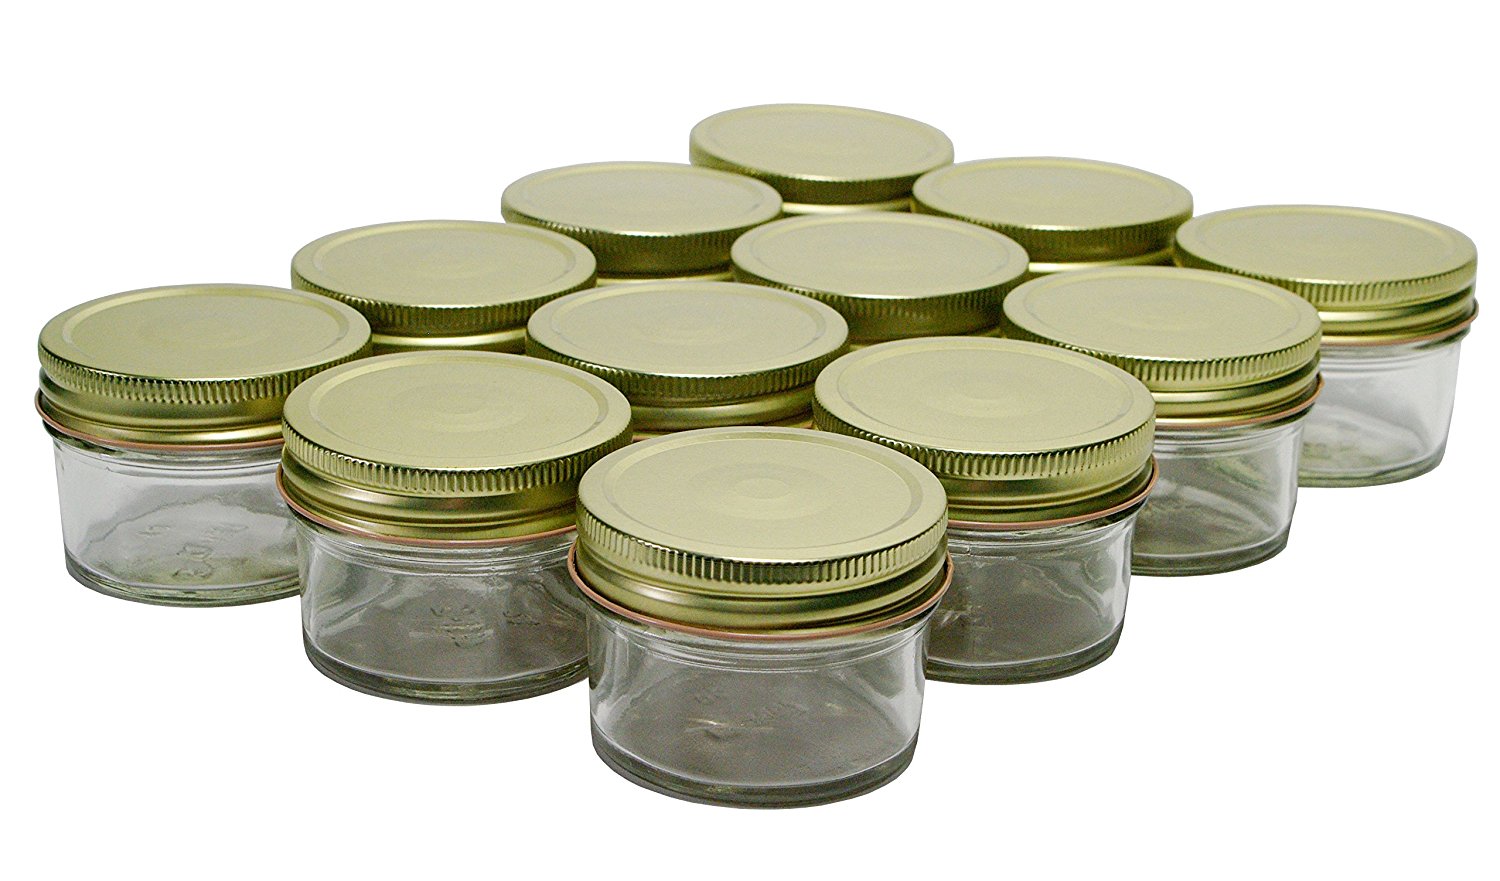 NMS 9 Ounce Glass Straight Sided Mason Canning Jars - With 70mm Black Metal  Lids - Case of 12